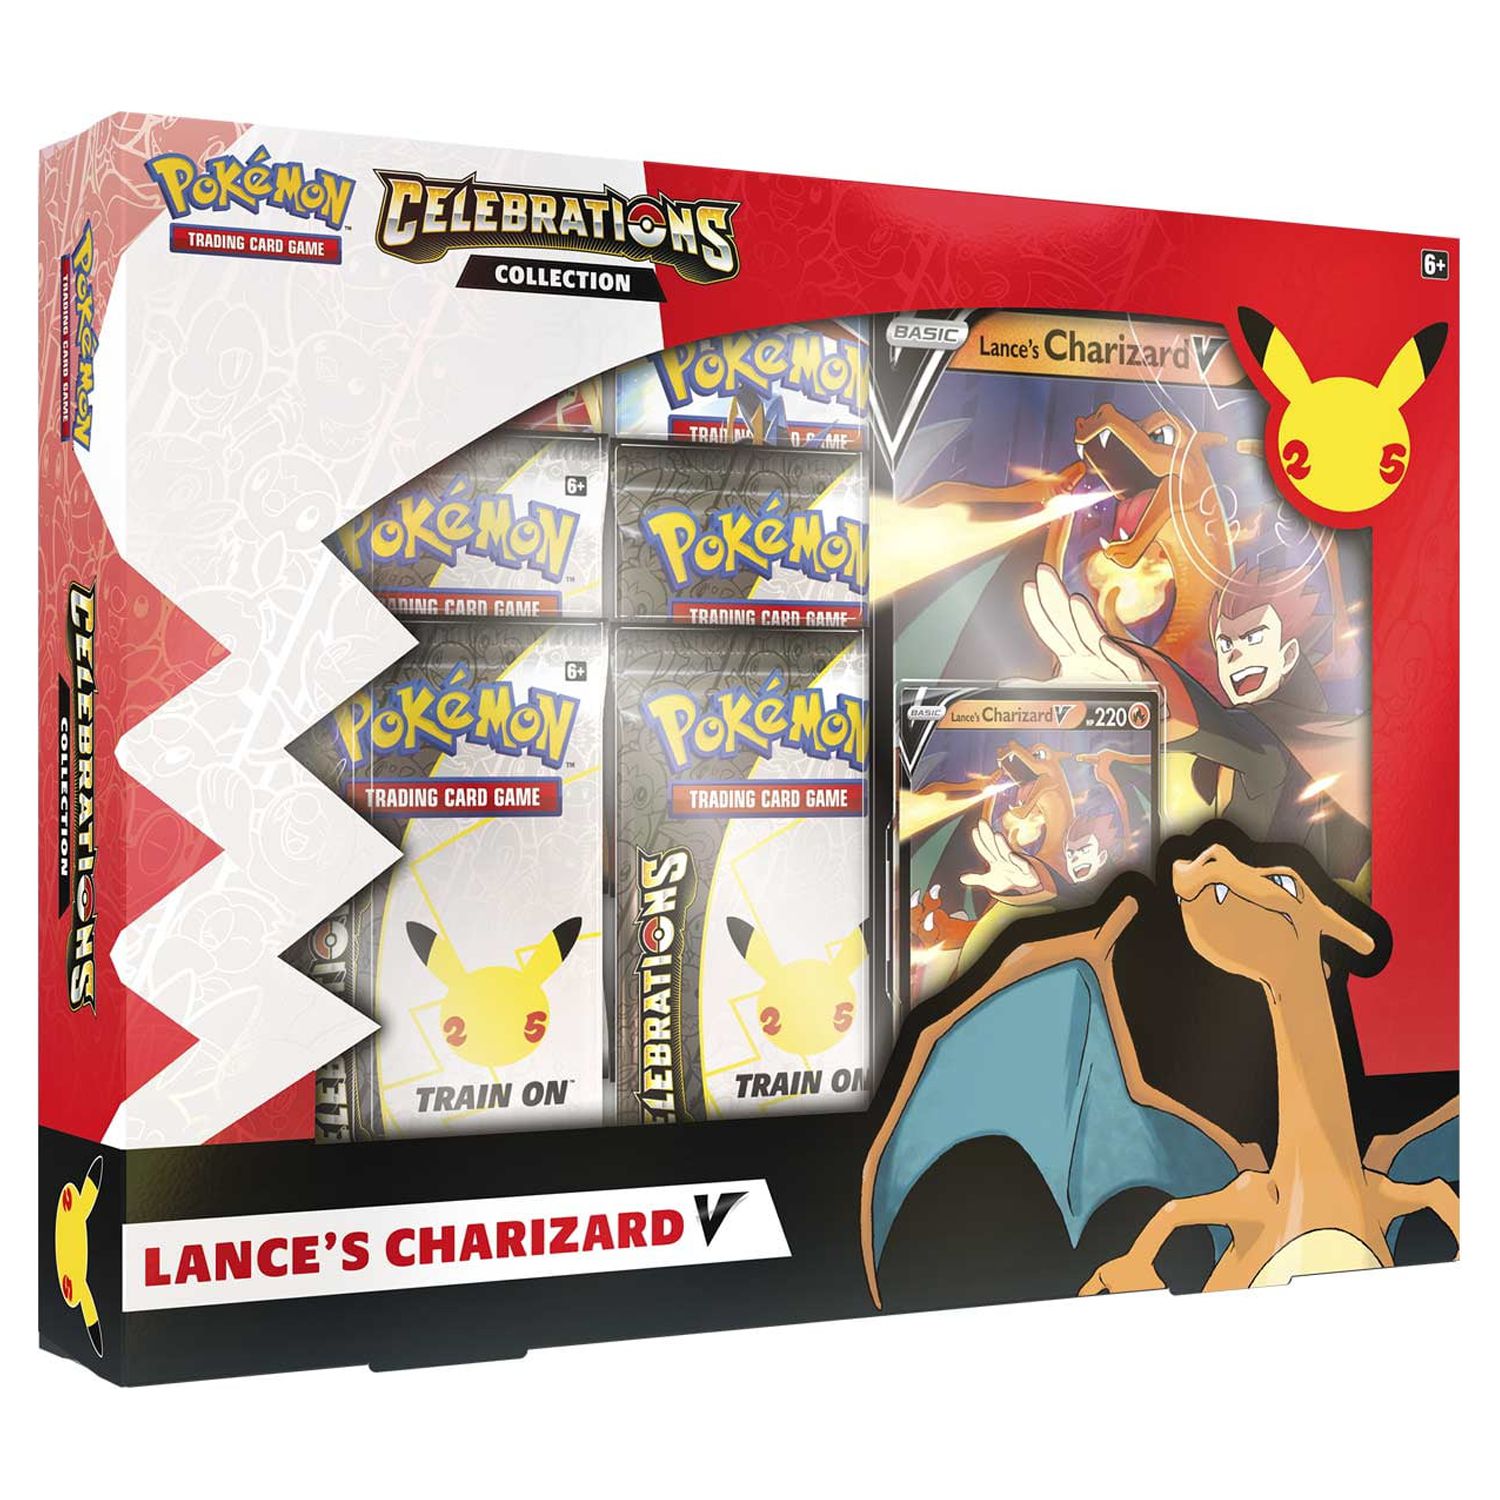 Pokémon Trading Card Games: Celebrations Collection (Lance's Charizard V) - image 1 of 7